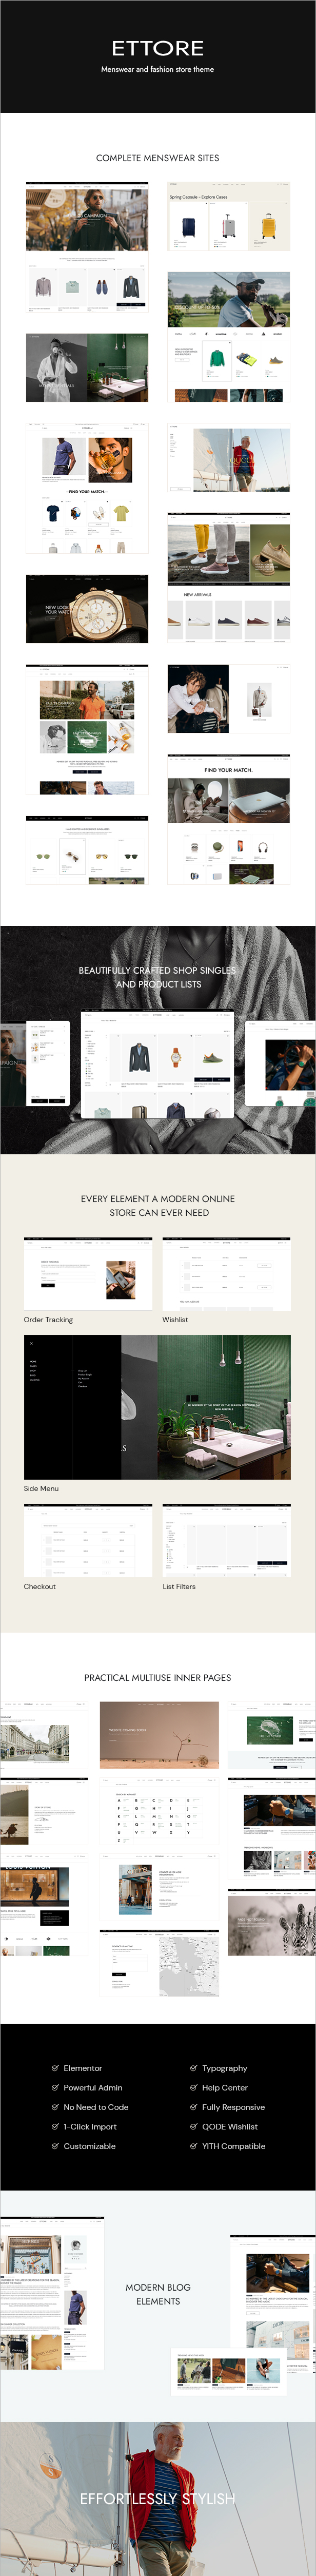 Ettore - Fashion Store and Menswear WooCommerce Theme - 1